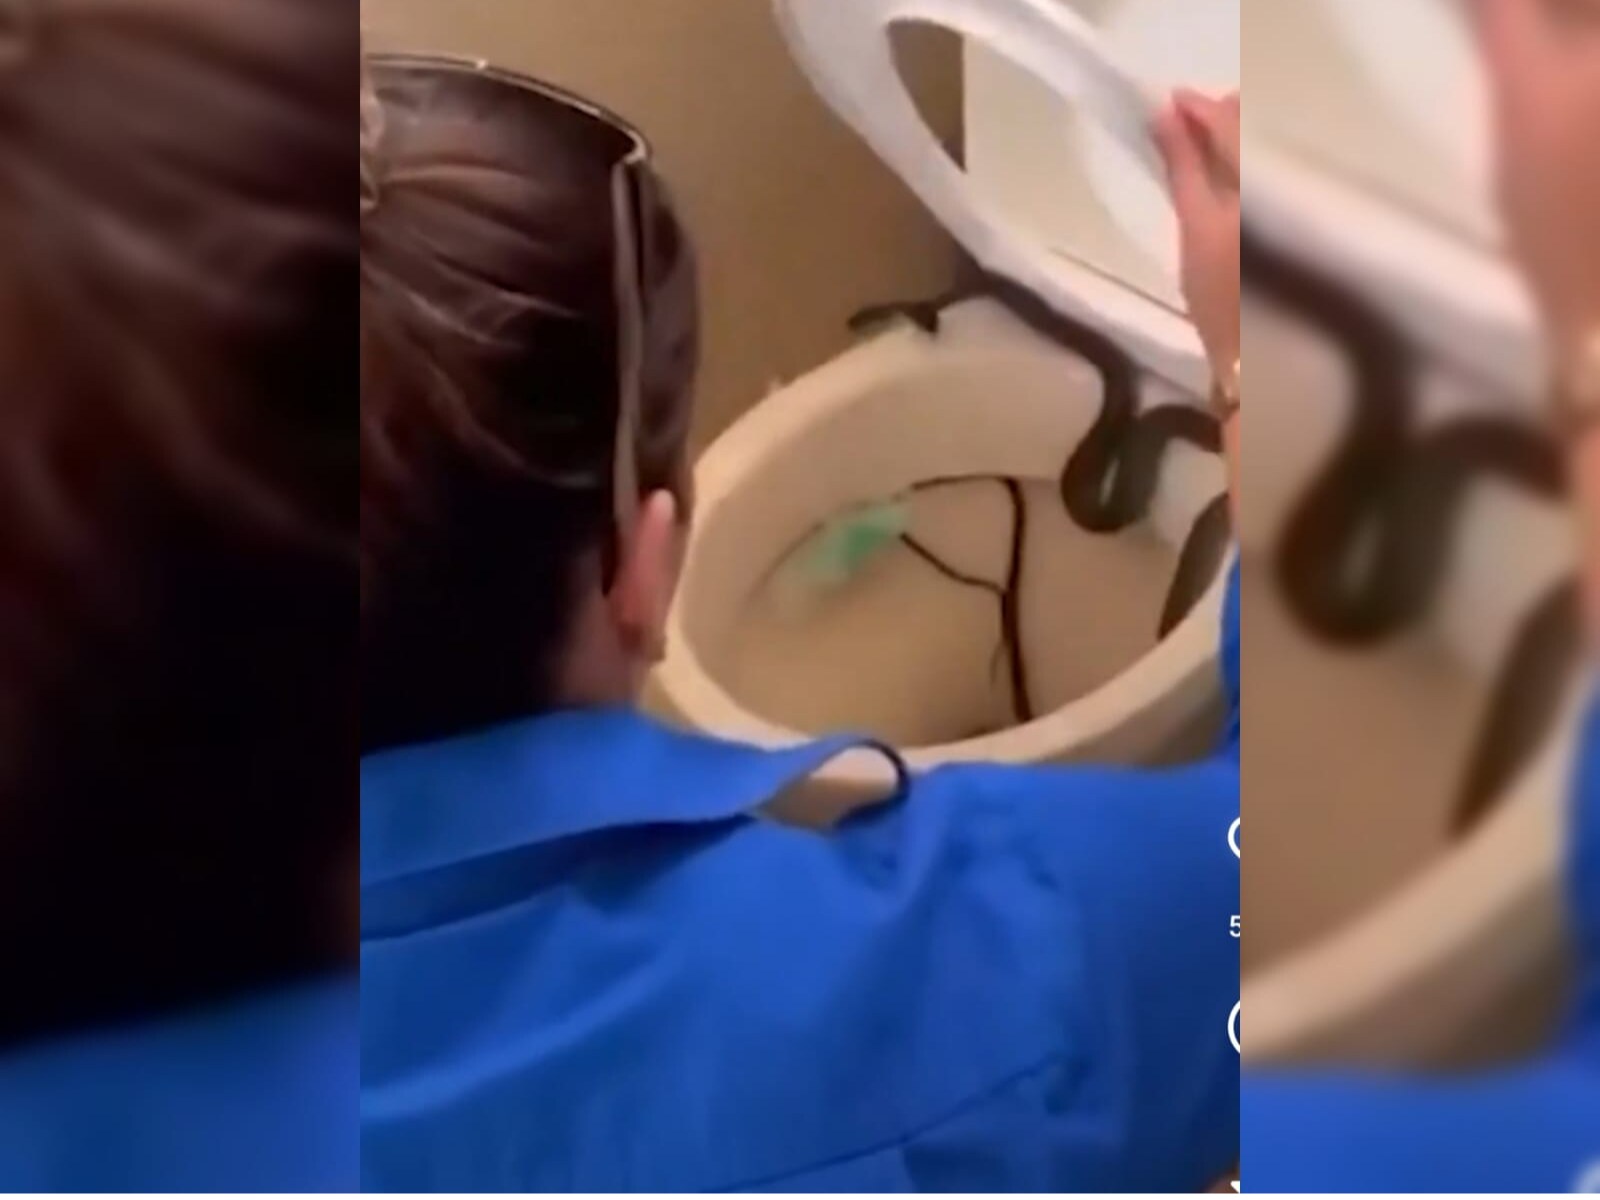 Massive snake slithers out of ladies' room toilet in Australia, becomes  your next nightmare